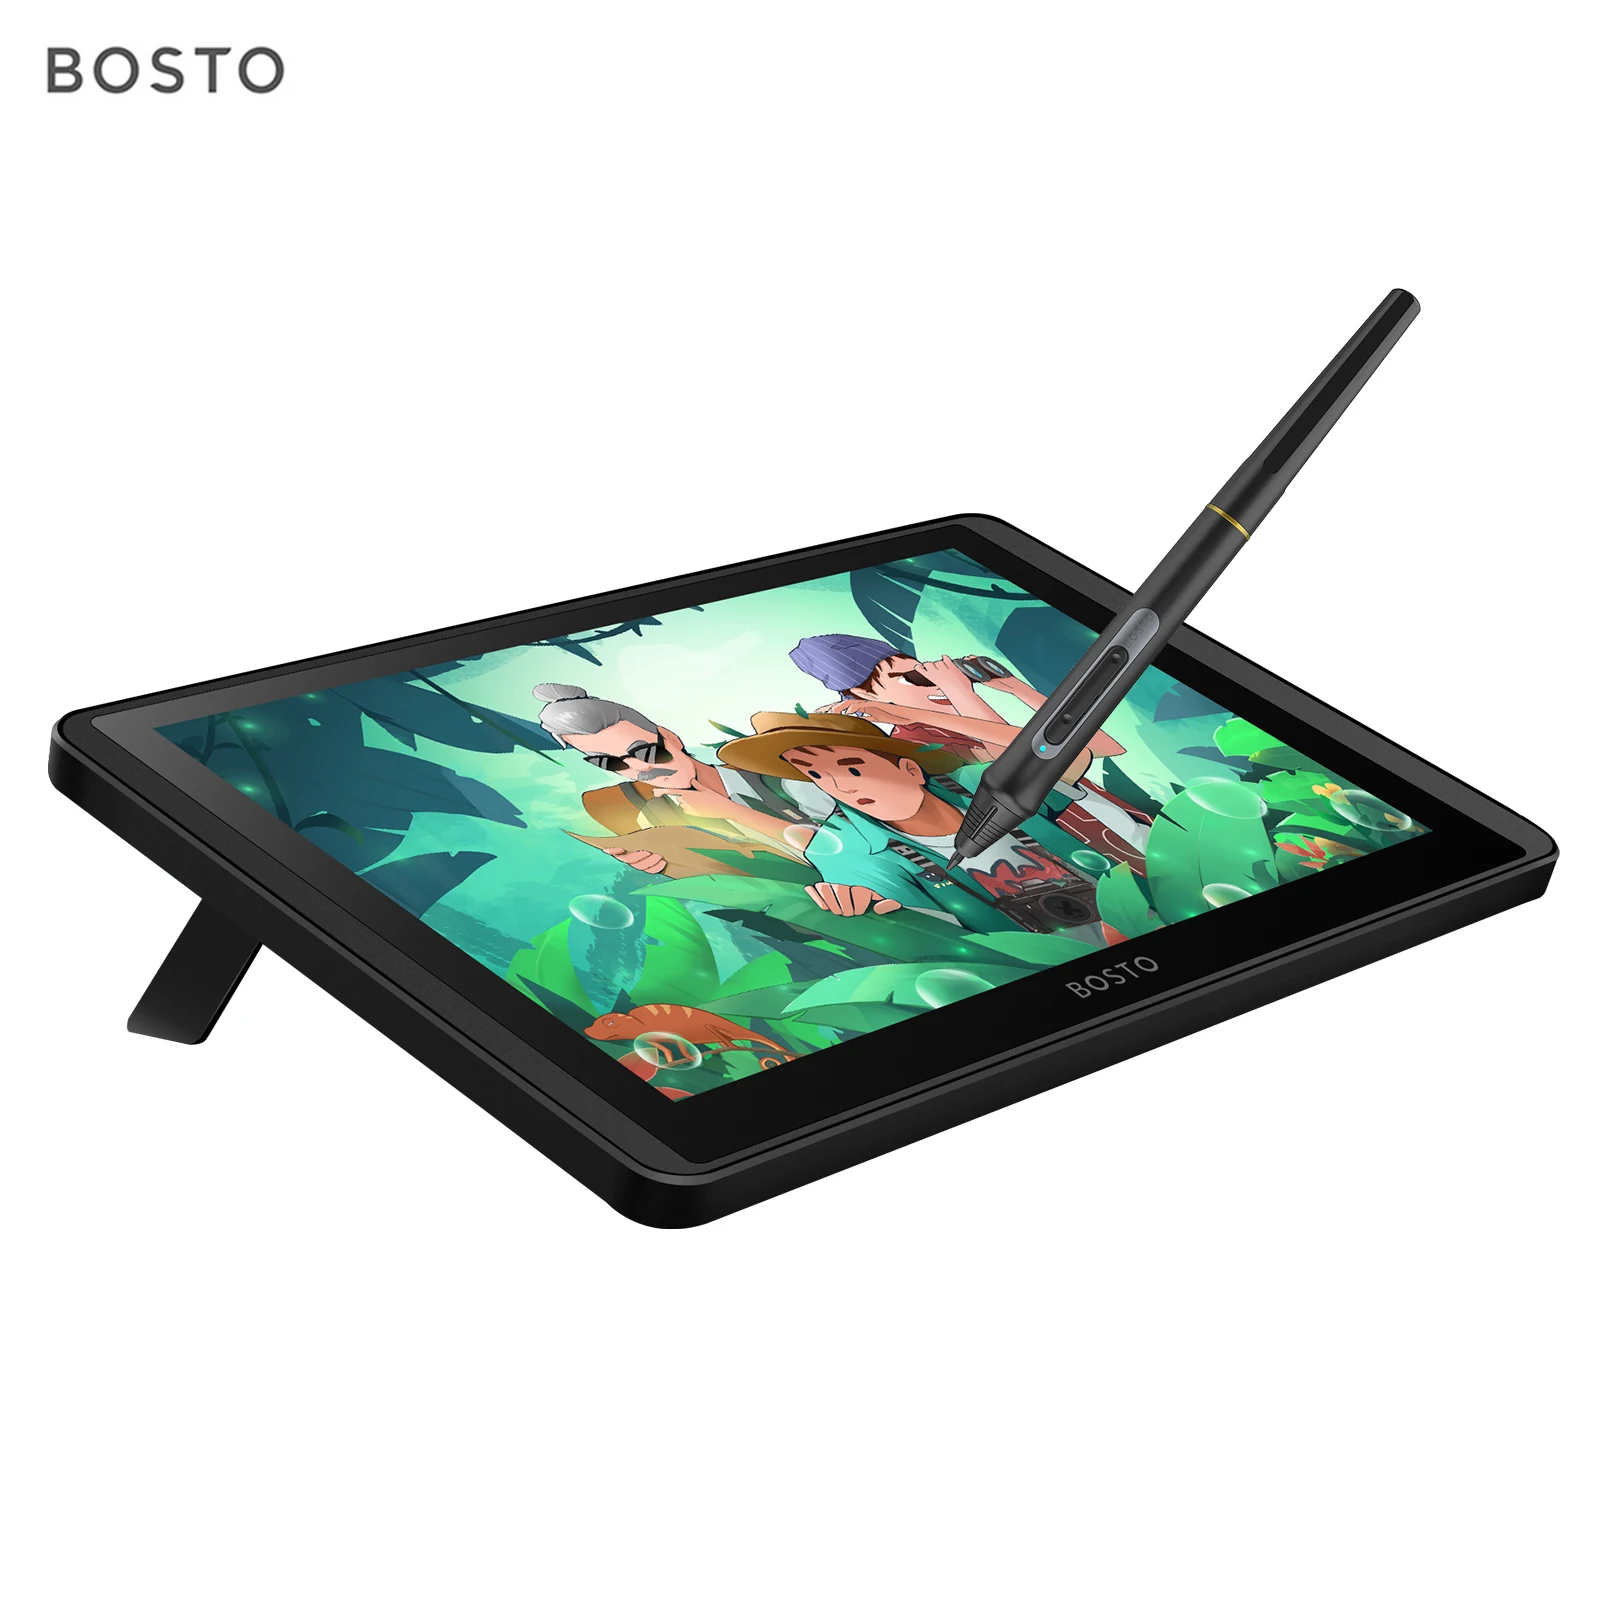 

BOSTO 12HD-A H-IPS LCD Graphics Drawing Tablet Monitor 11.6 Inch Size 1366x768 Display 8192 Pressure Level Support Windows MacOS